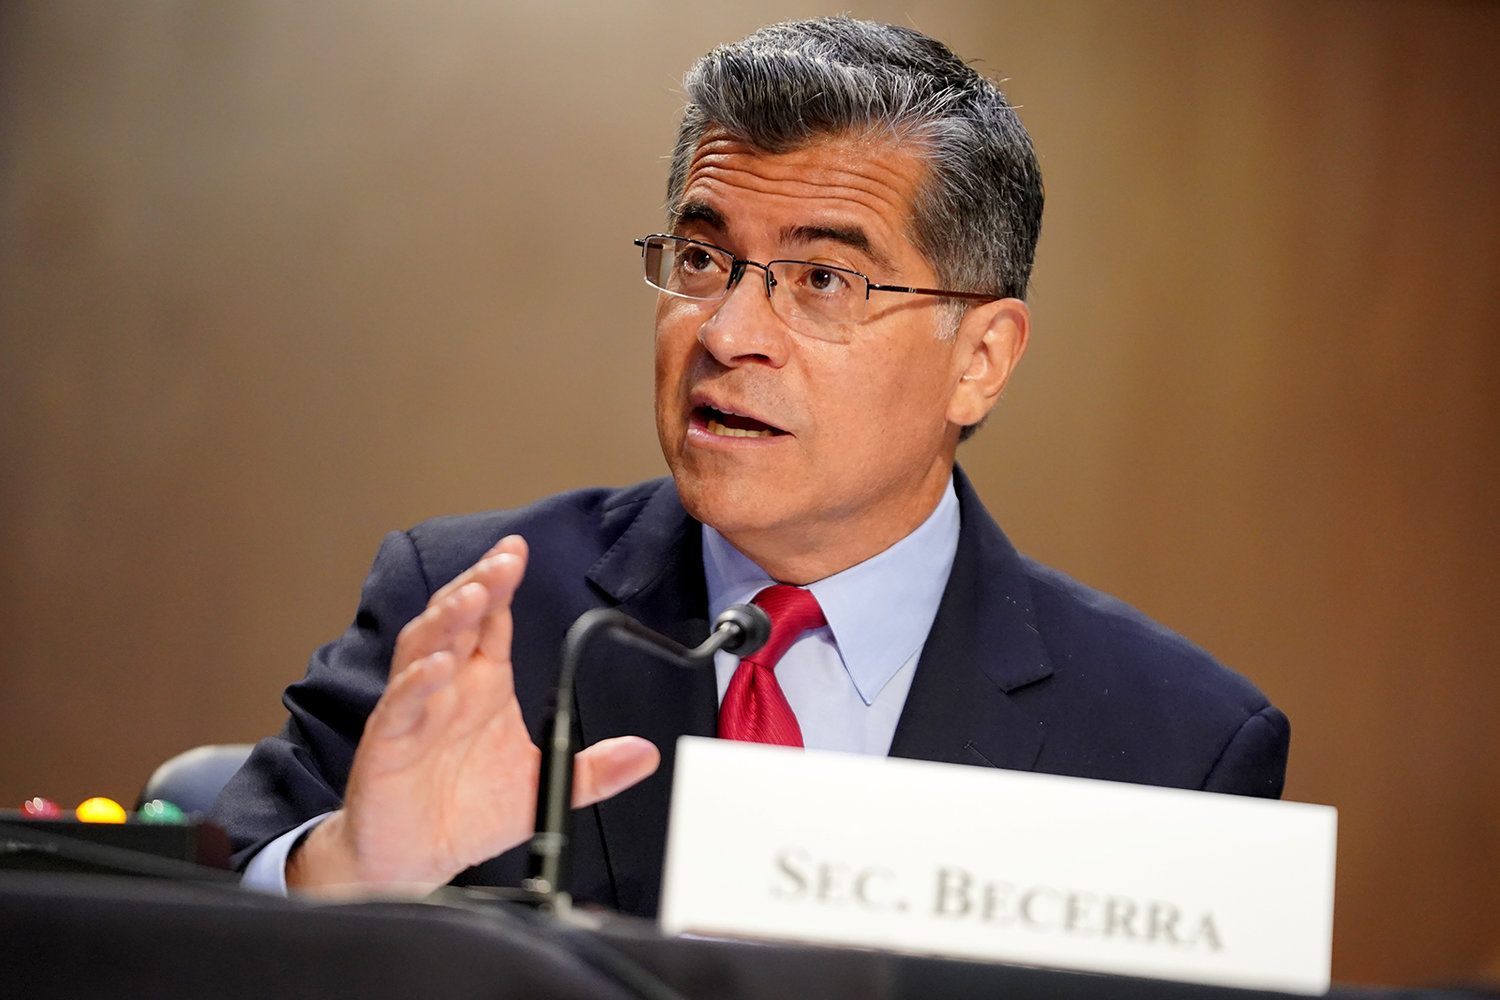 Secretary of Health and Human Services Xavier Becerra at Capitol Hill on Sept. 30, 2021, in Washington, D.C. (Greg Nash/Pool/Getty Images/TNS)